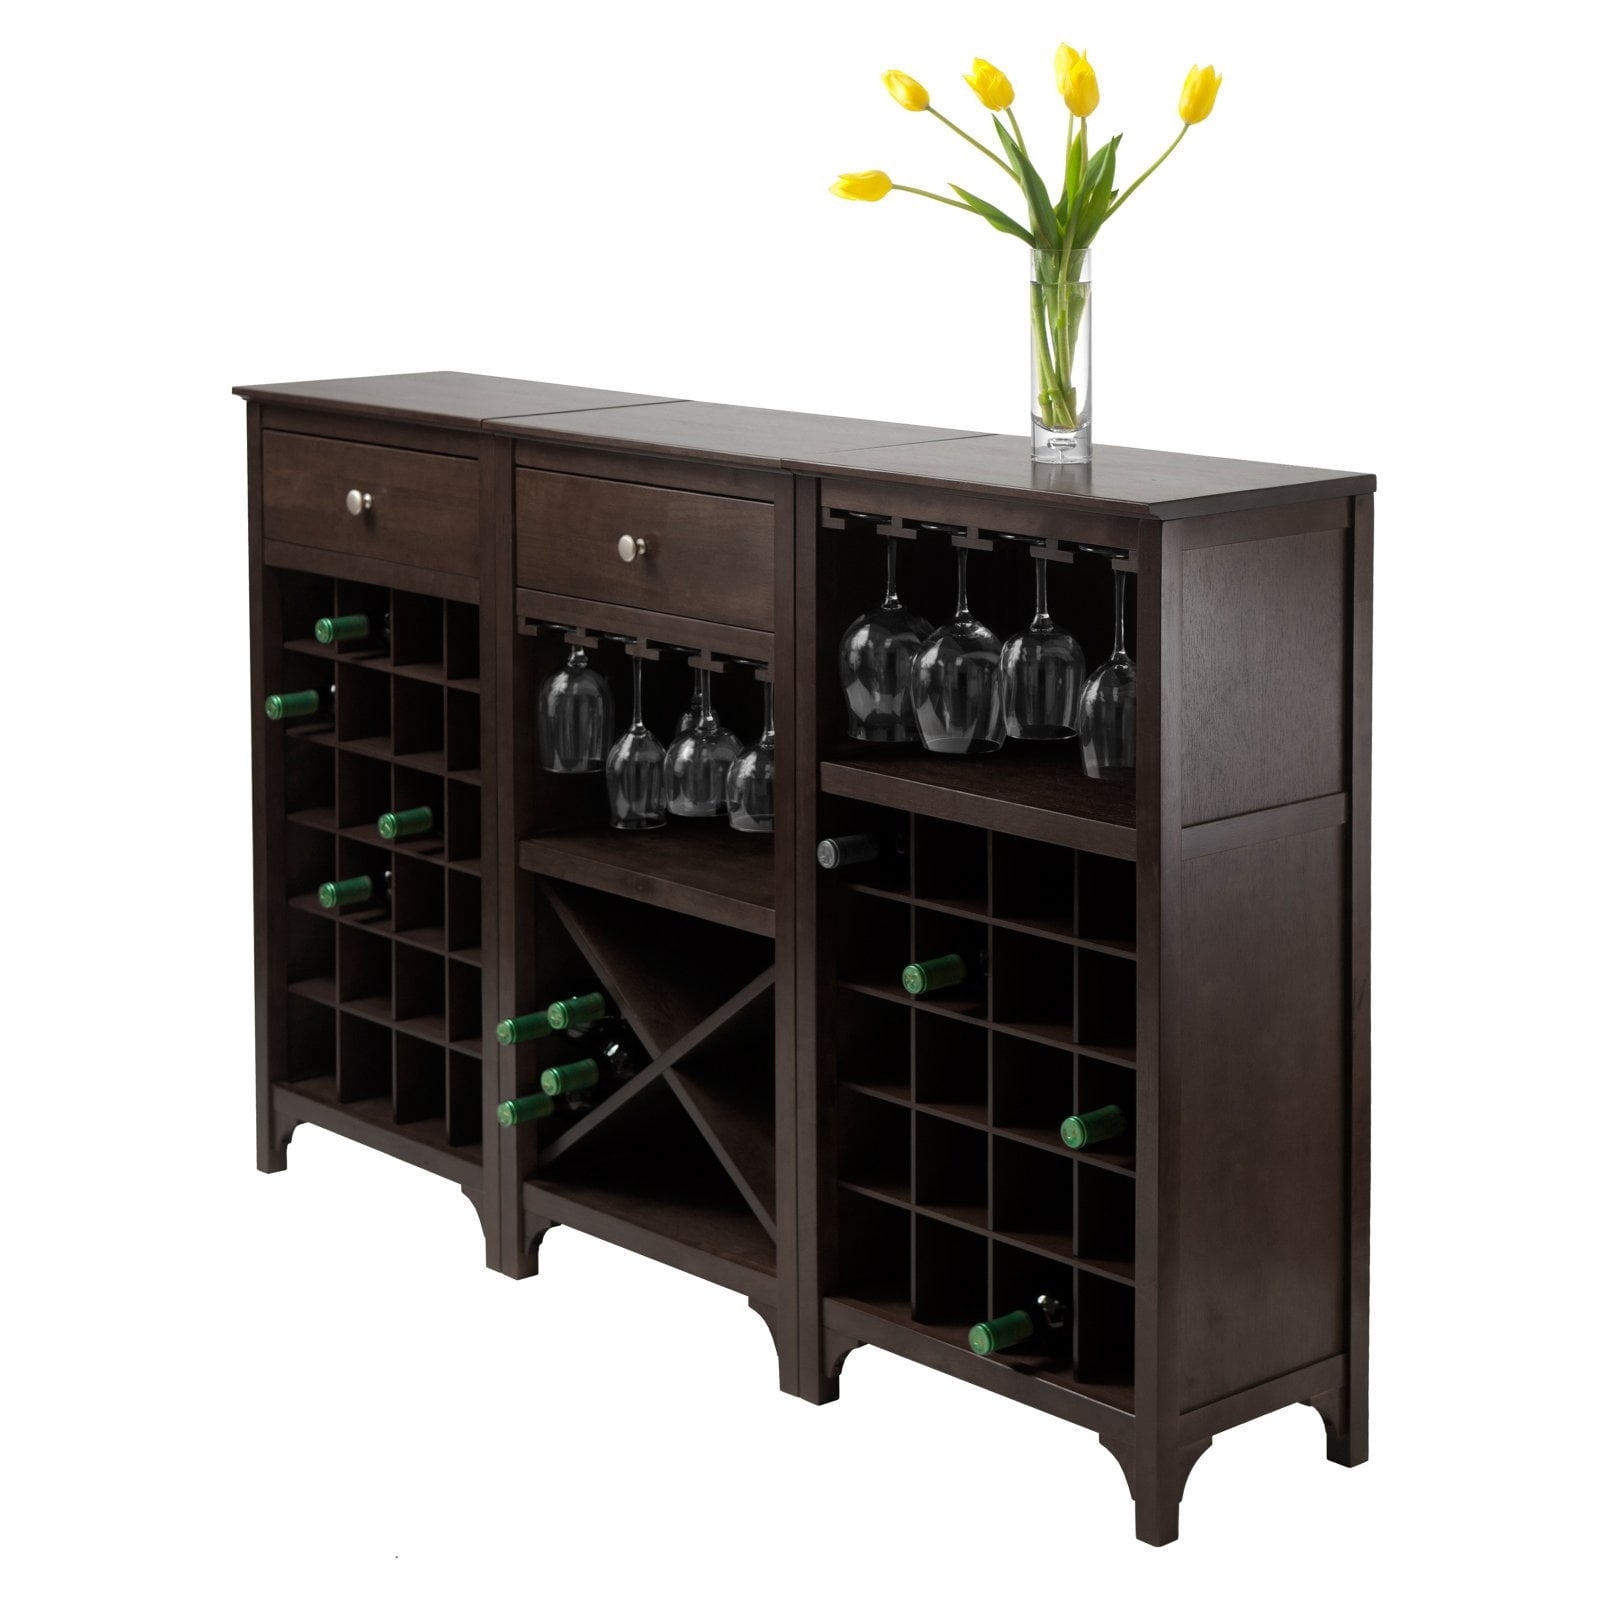 the wine cabinet